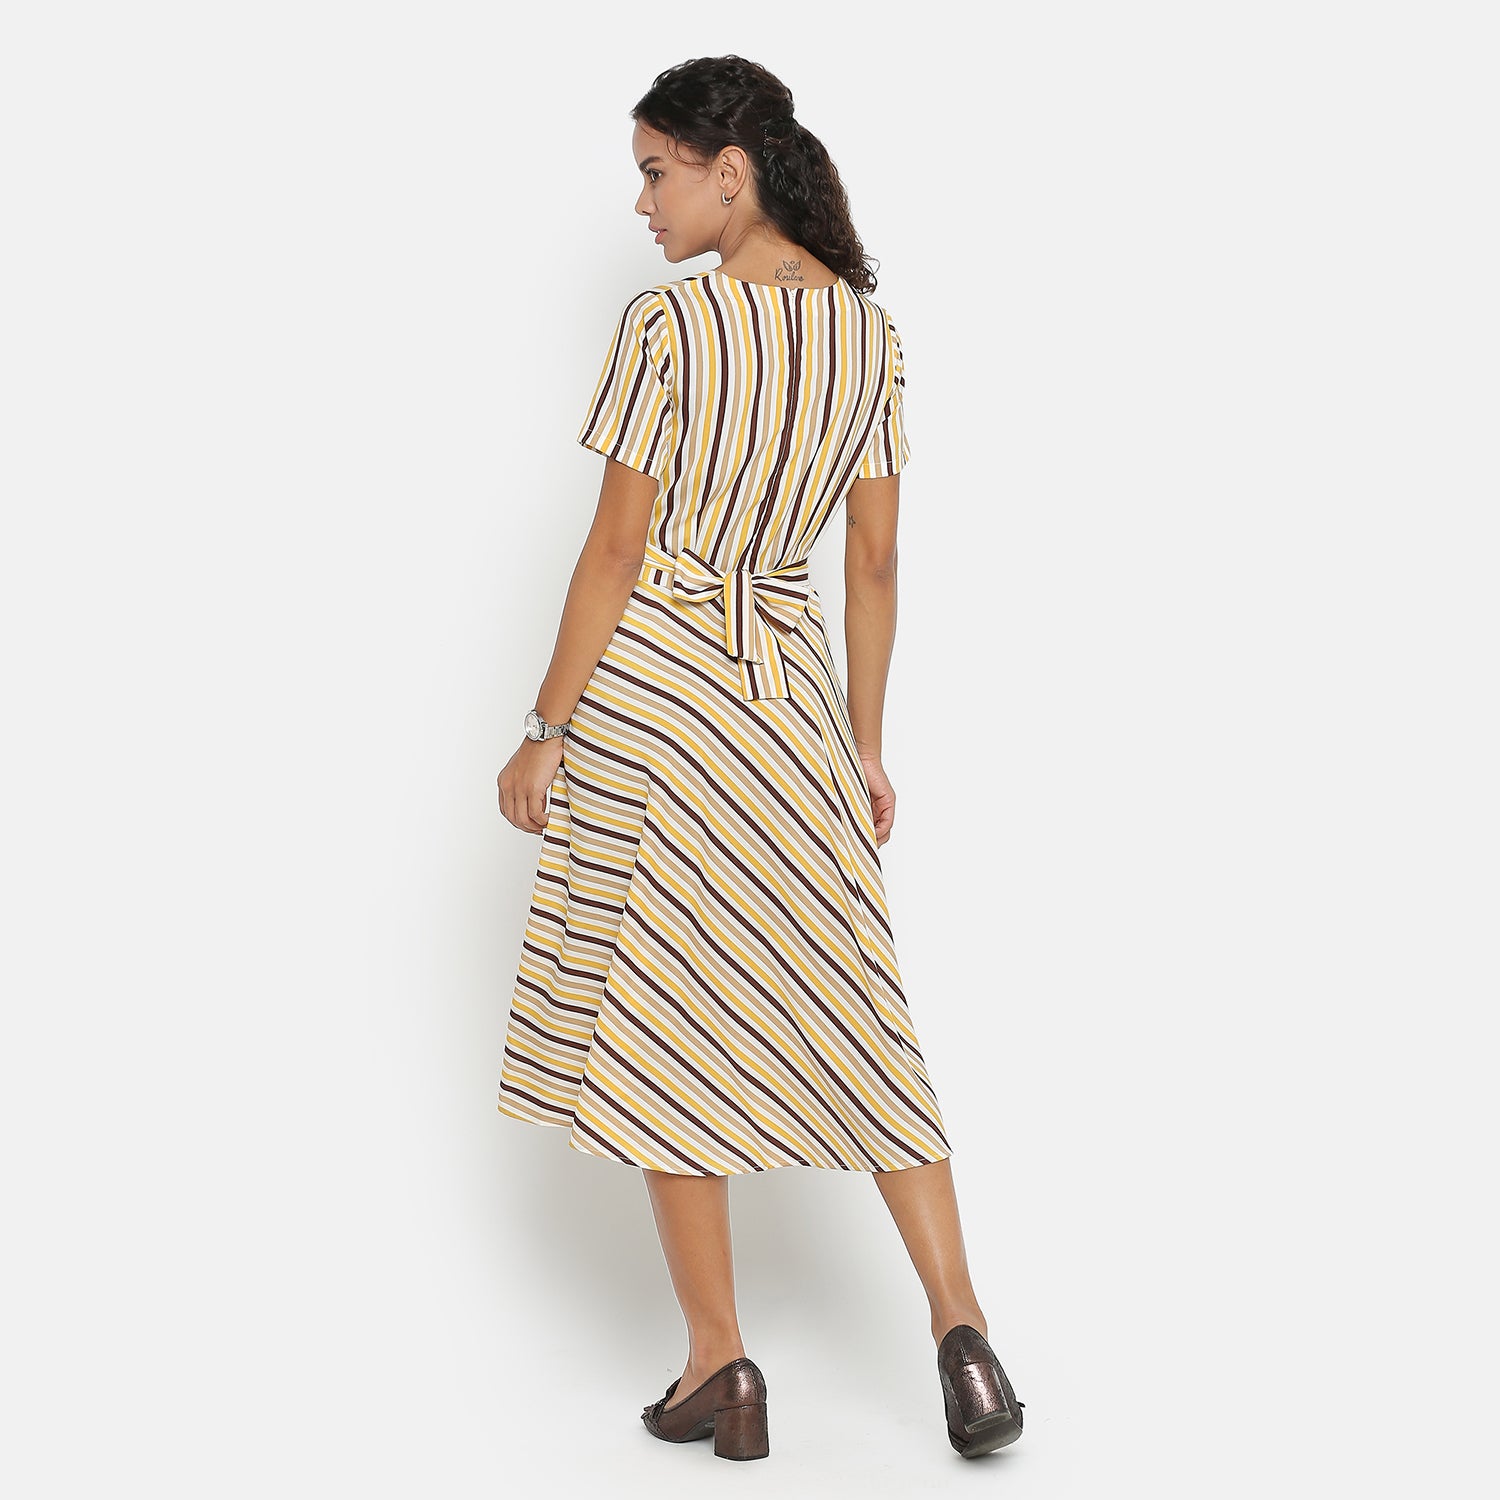 Yellow & Brown Stripe Dress With Front Tie Knot